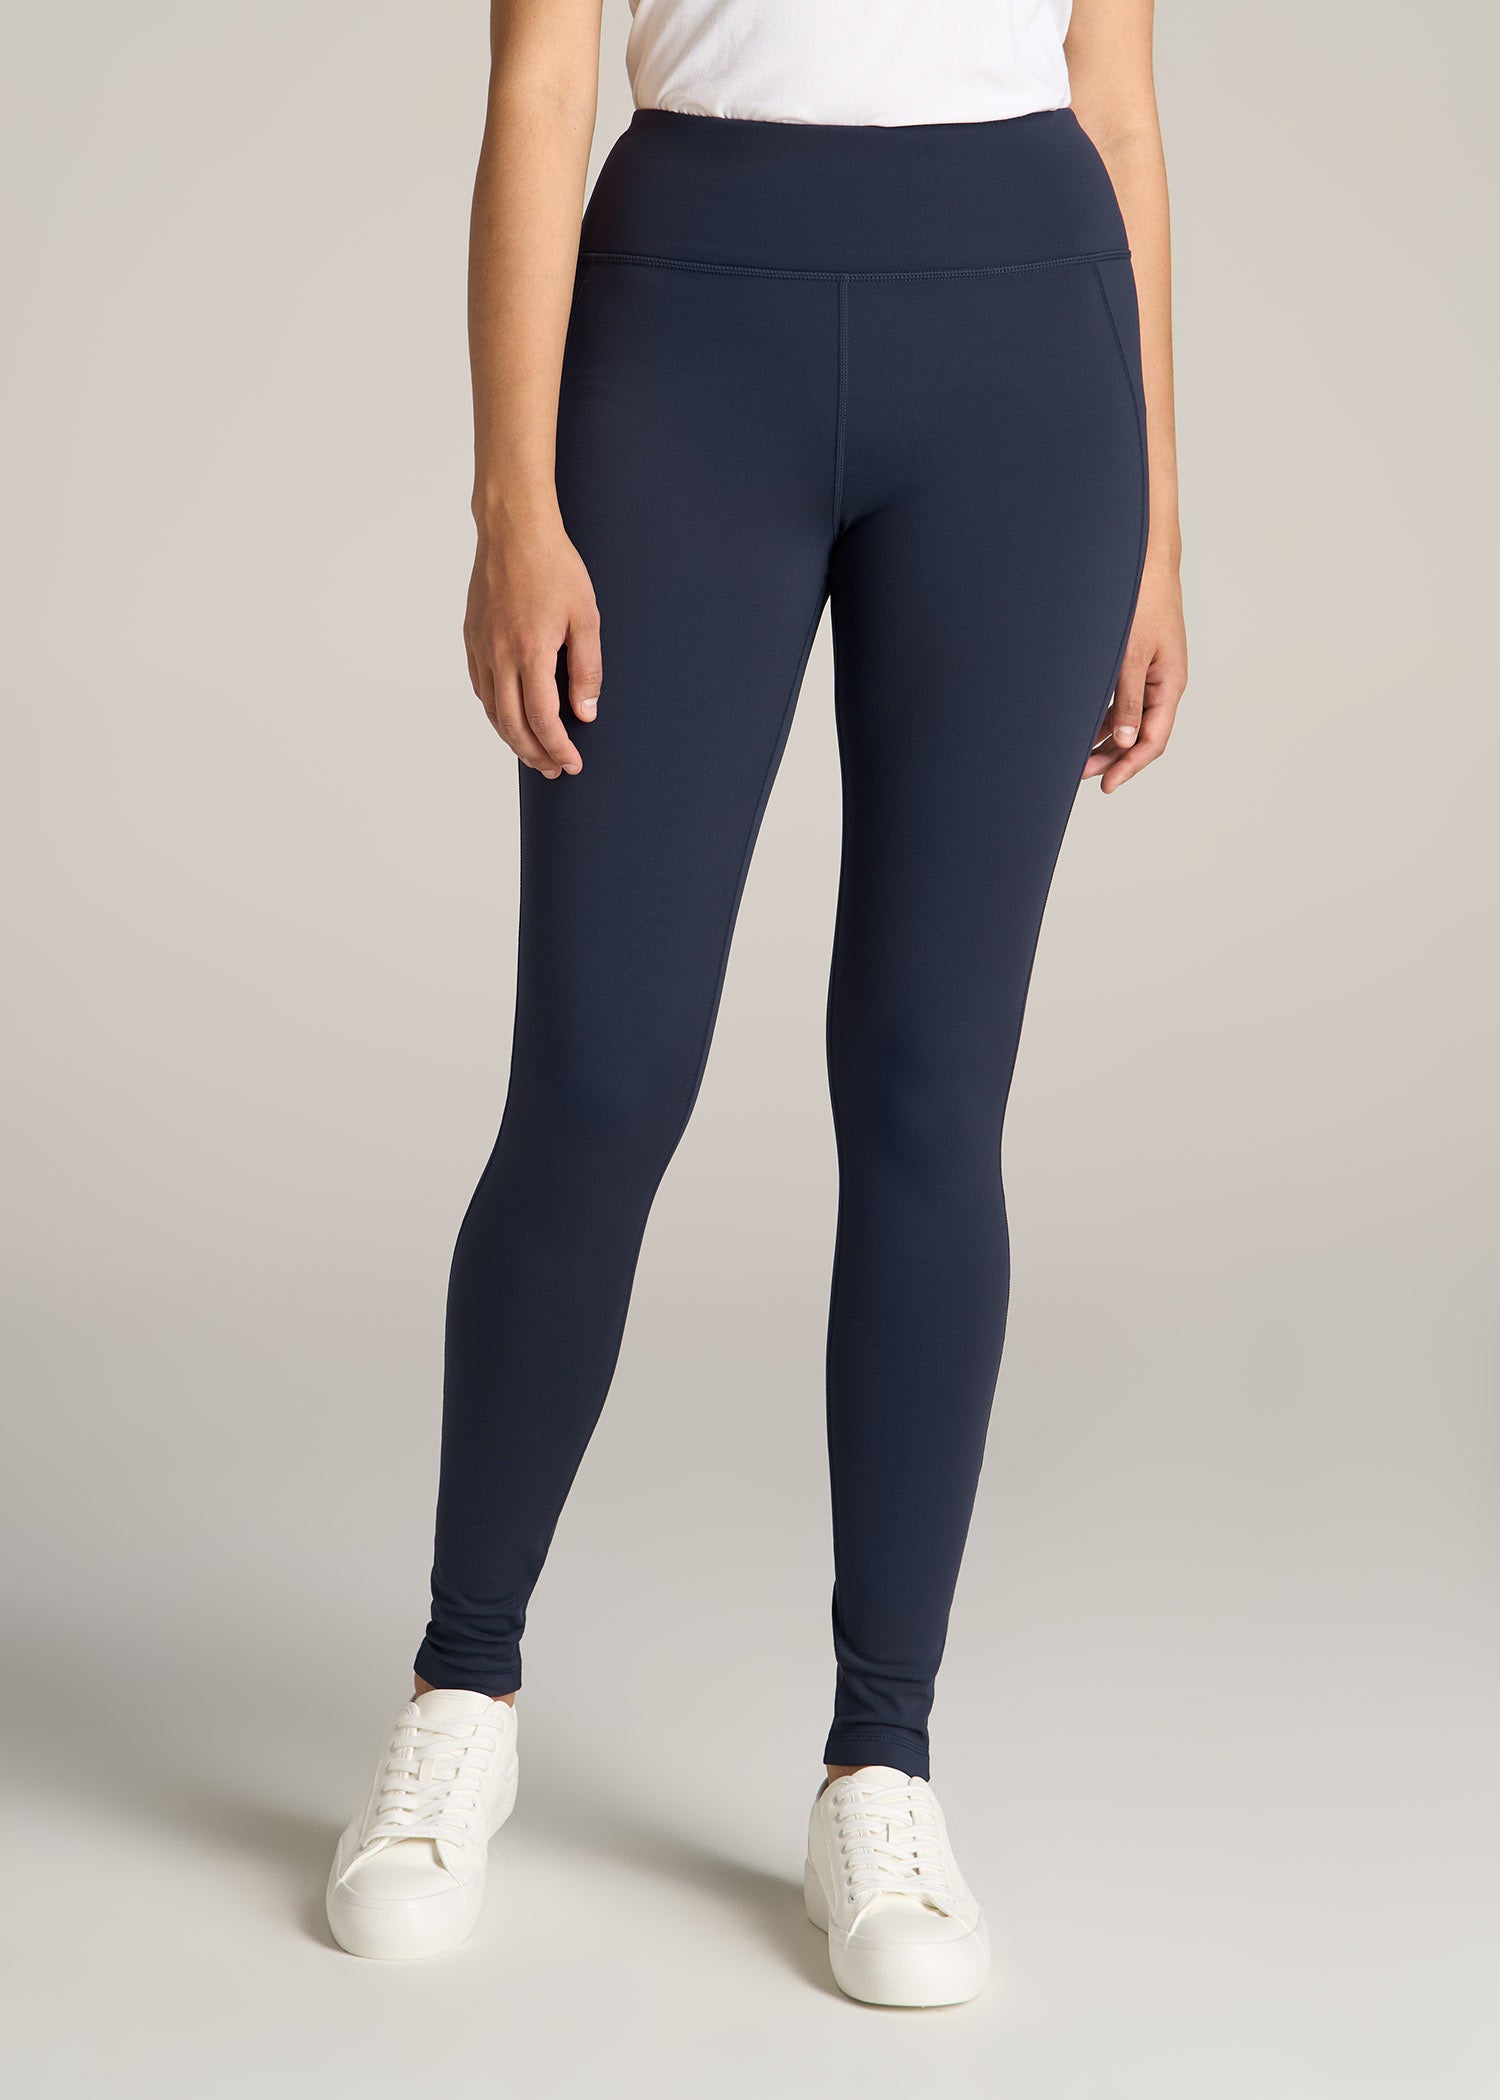 Adore Womens Fleece Lined Leggings High Stretch Yoga Pants with Pockets-Navy  Blue